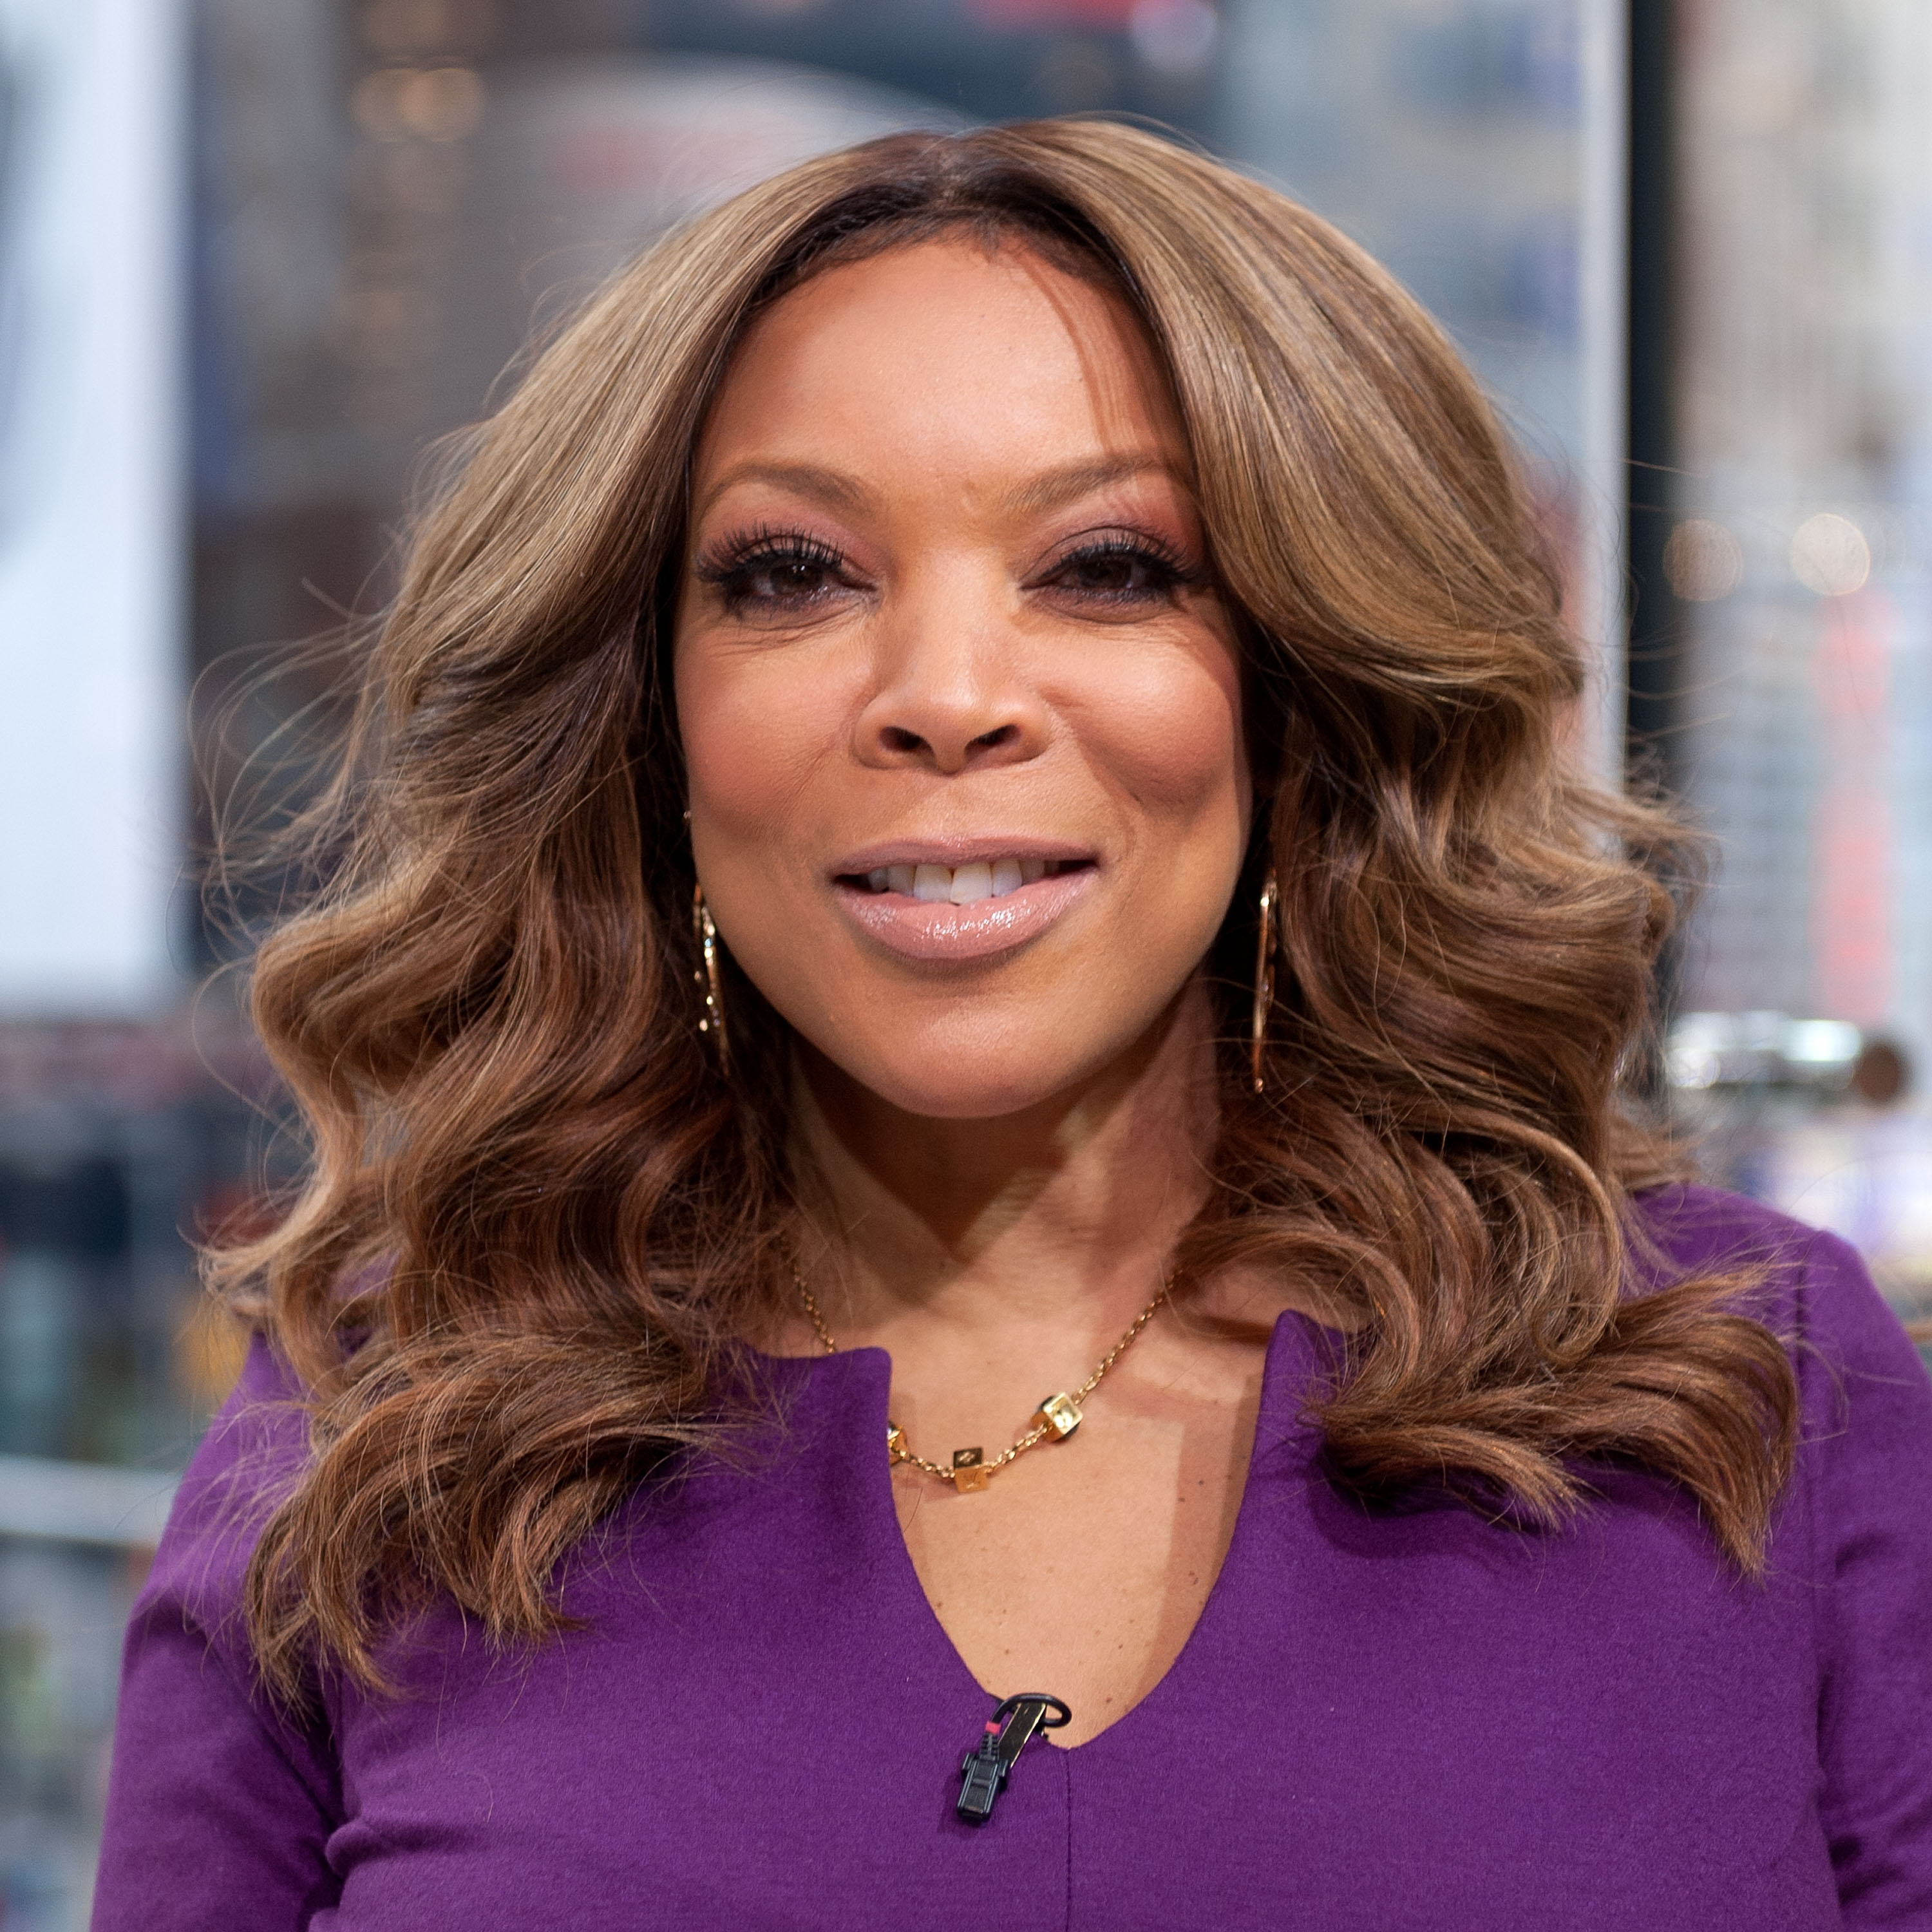 Wendy Williams visits "Extra" in New York City on January 21, 2015. | Photo: Getty Images